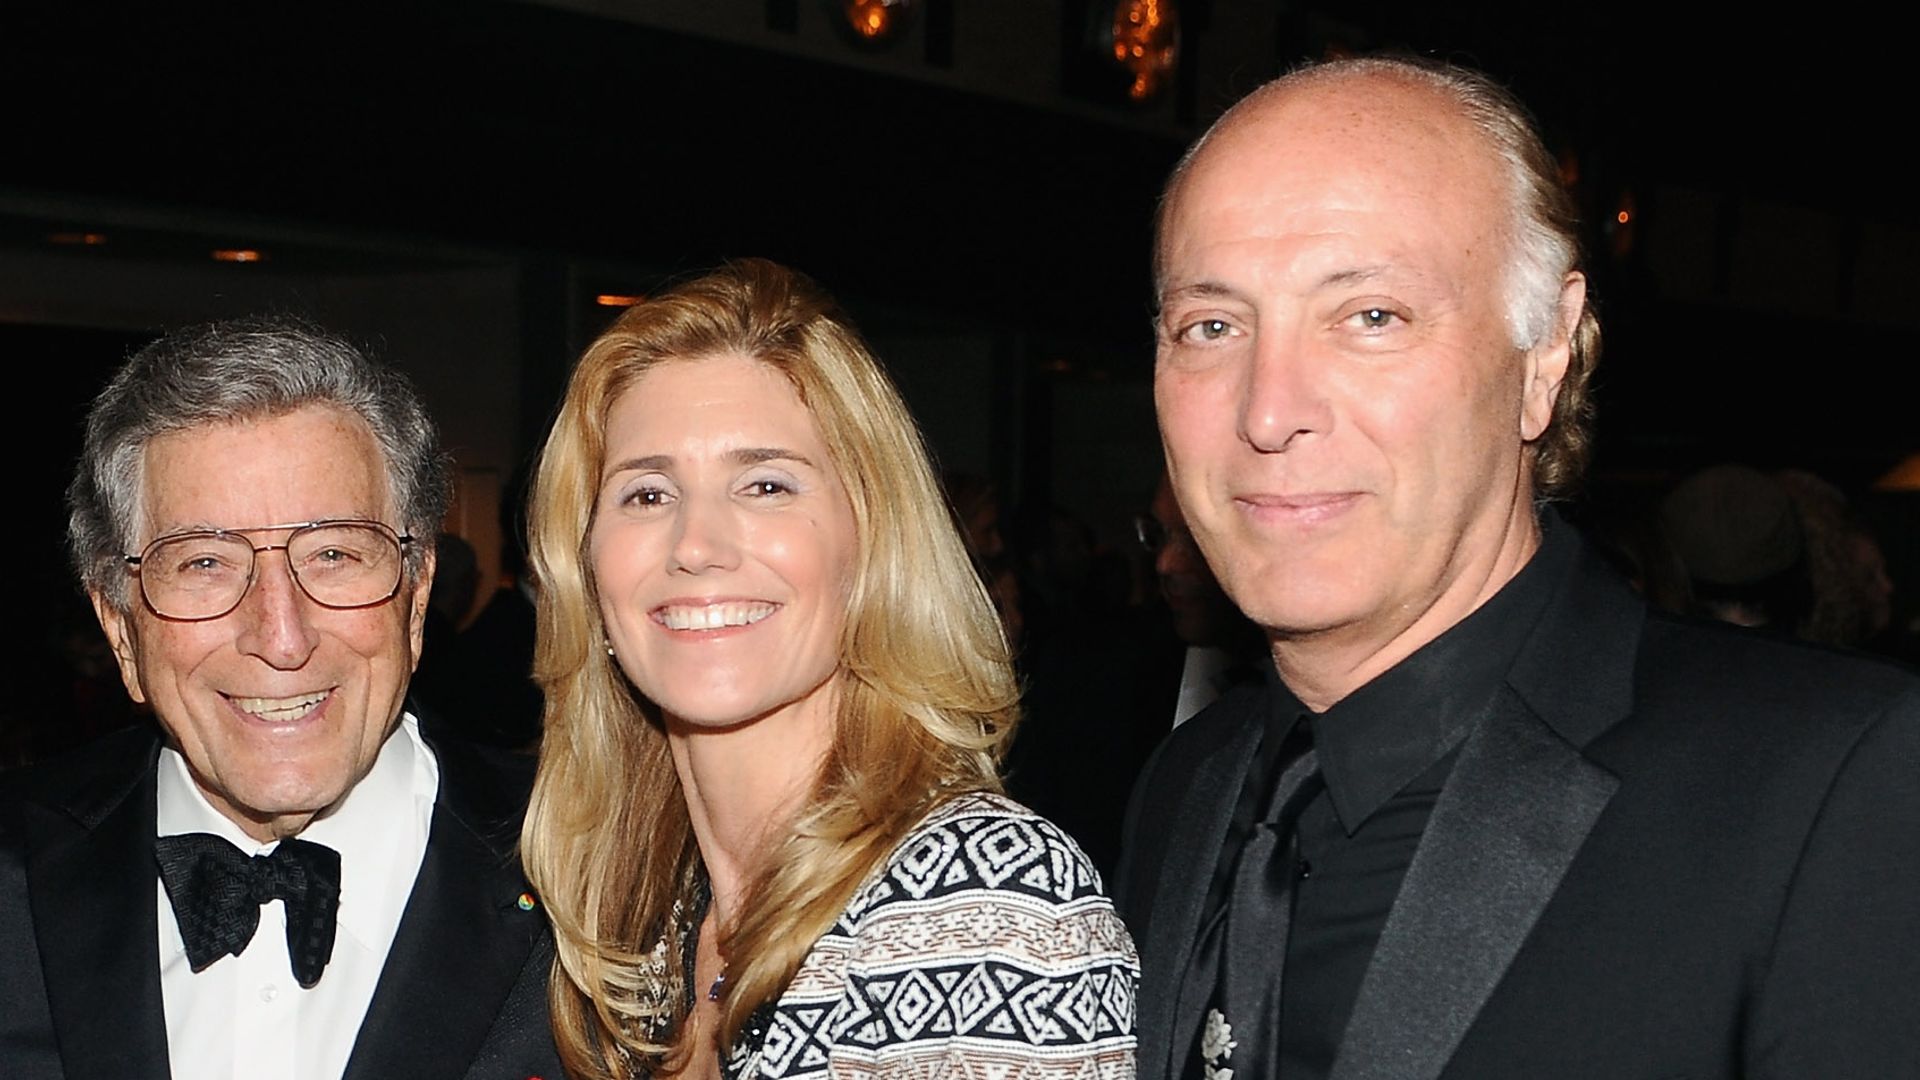 Tony Bennett, Susan Crow and Danny Bennett attend The Film Society of Lincoln Center's 40th Chaplin Award Gala at Lincoln Center on April 22, 2013 in New York City